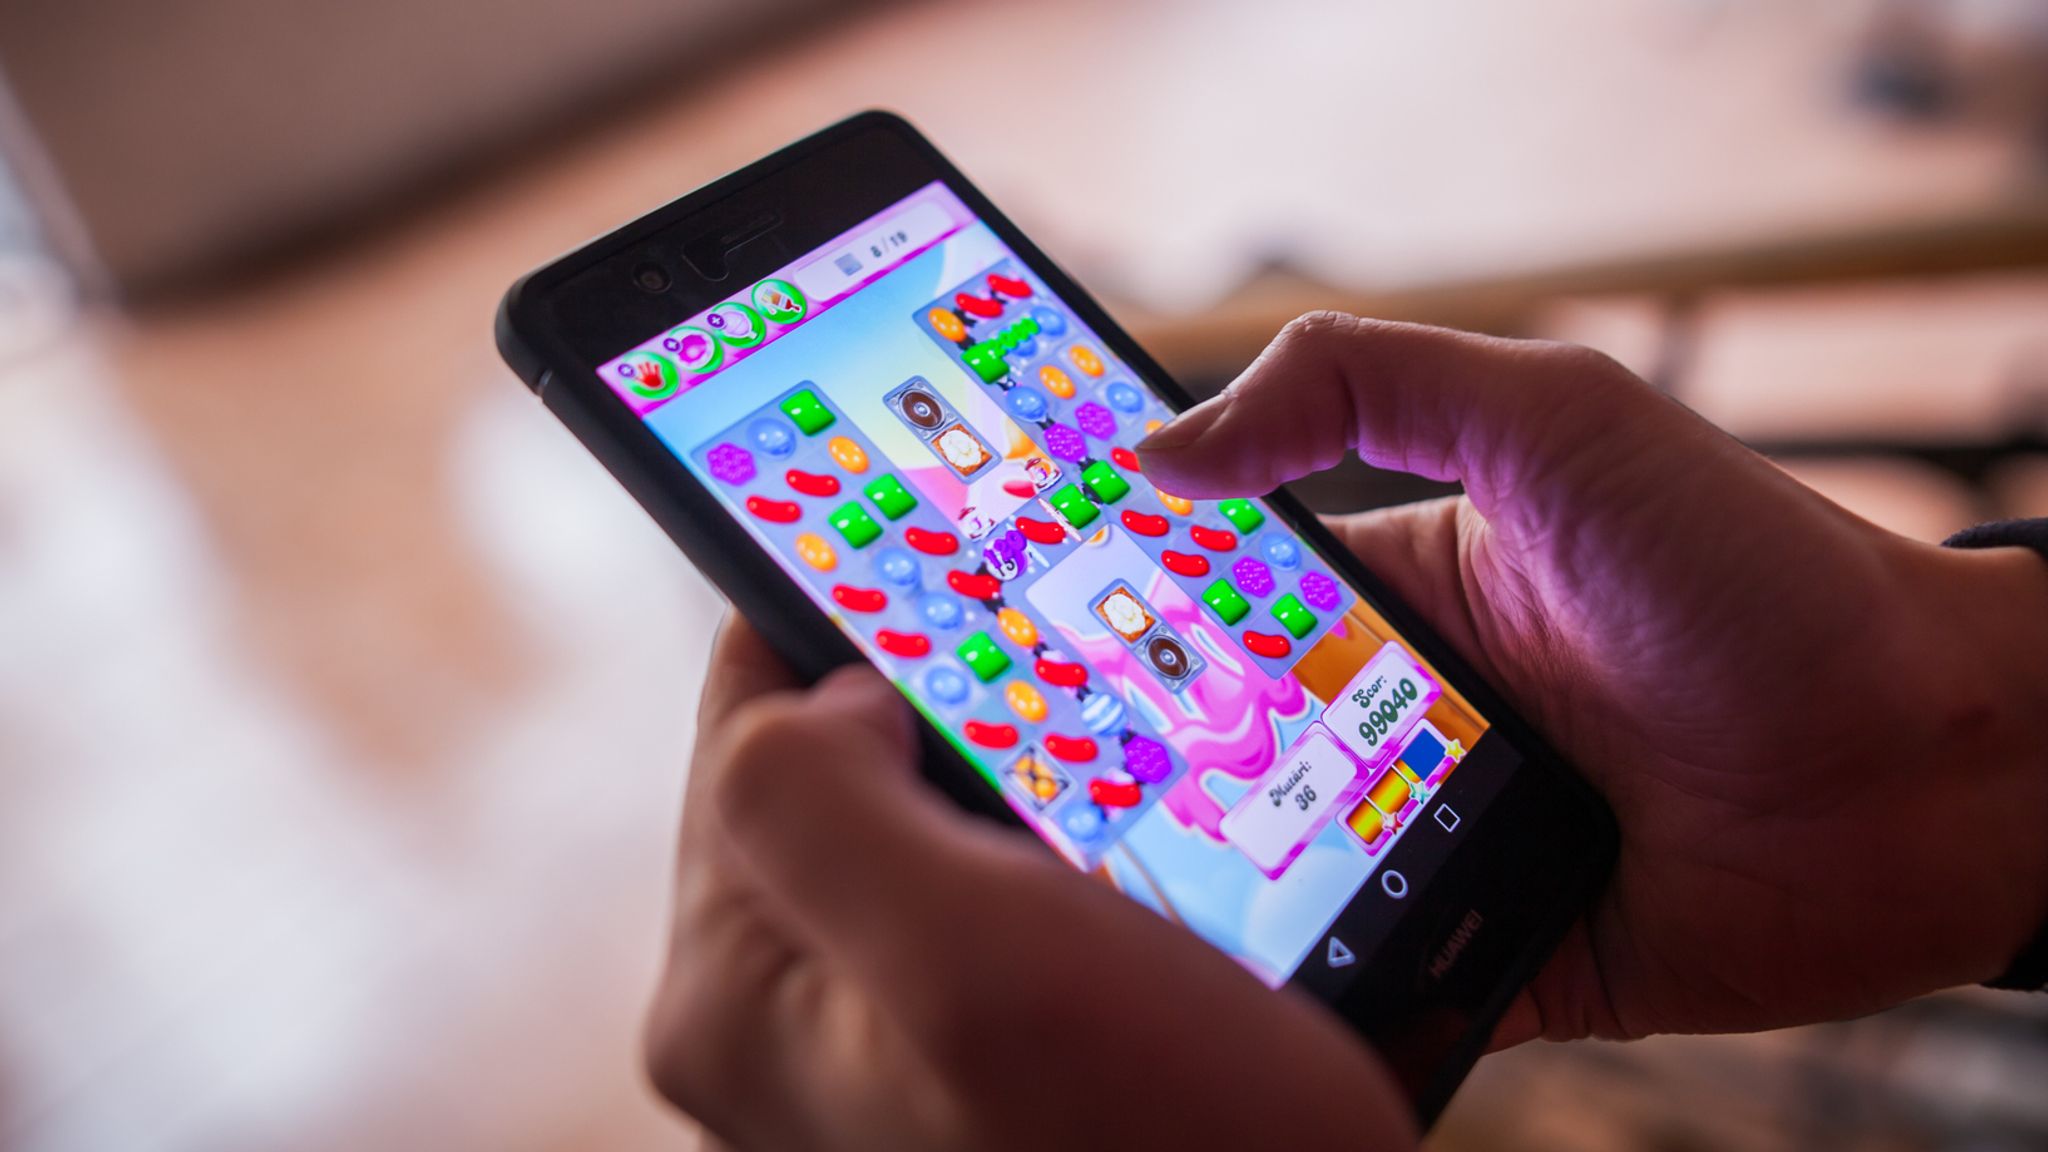 Free Mobile Games Candy Crush 